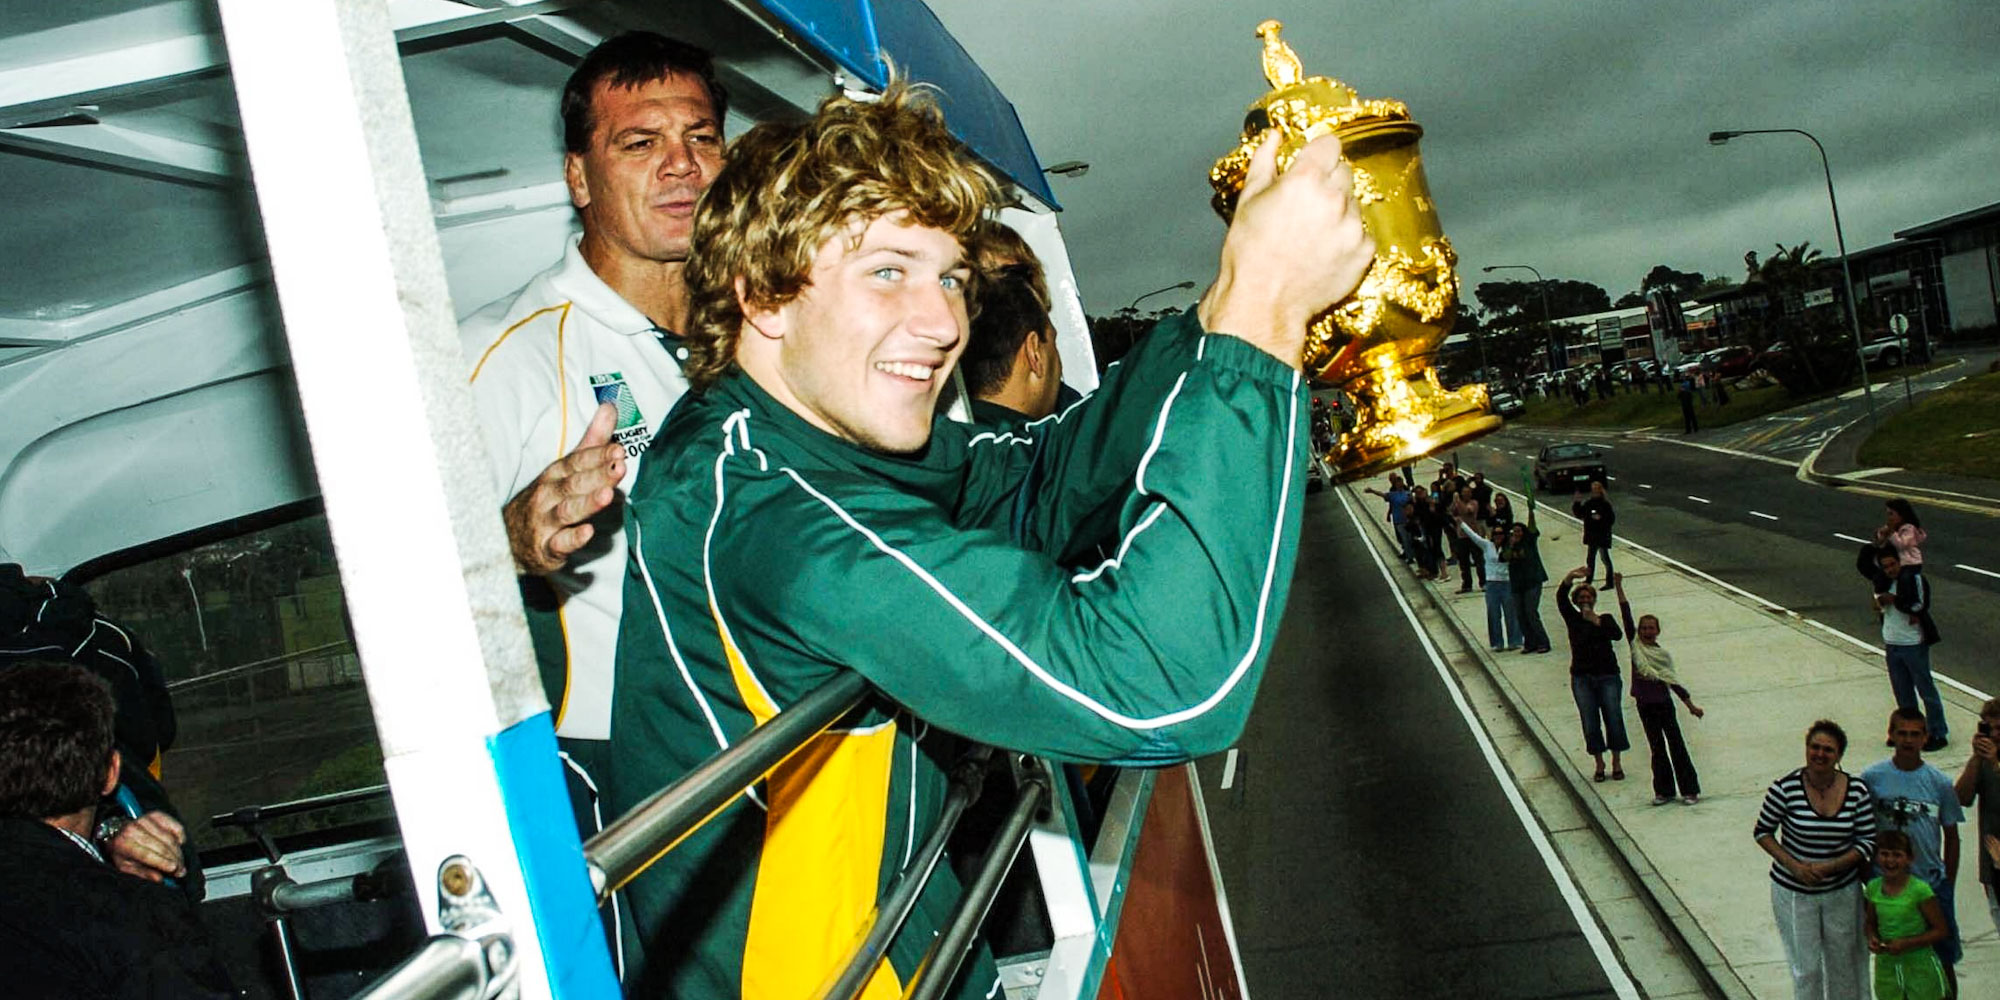 Celebrating the RWC victory as a 20-year-old in 2007.